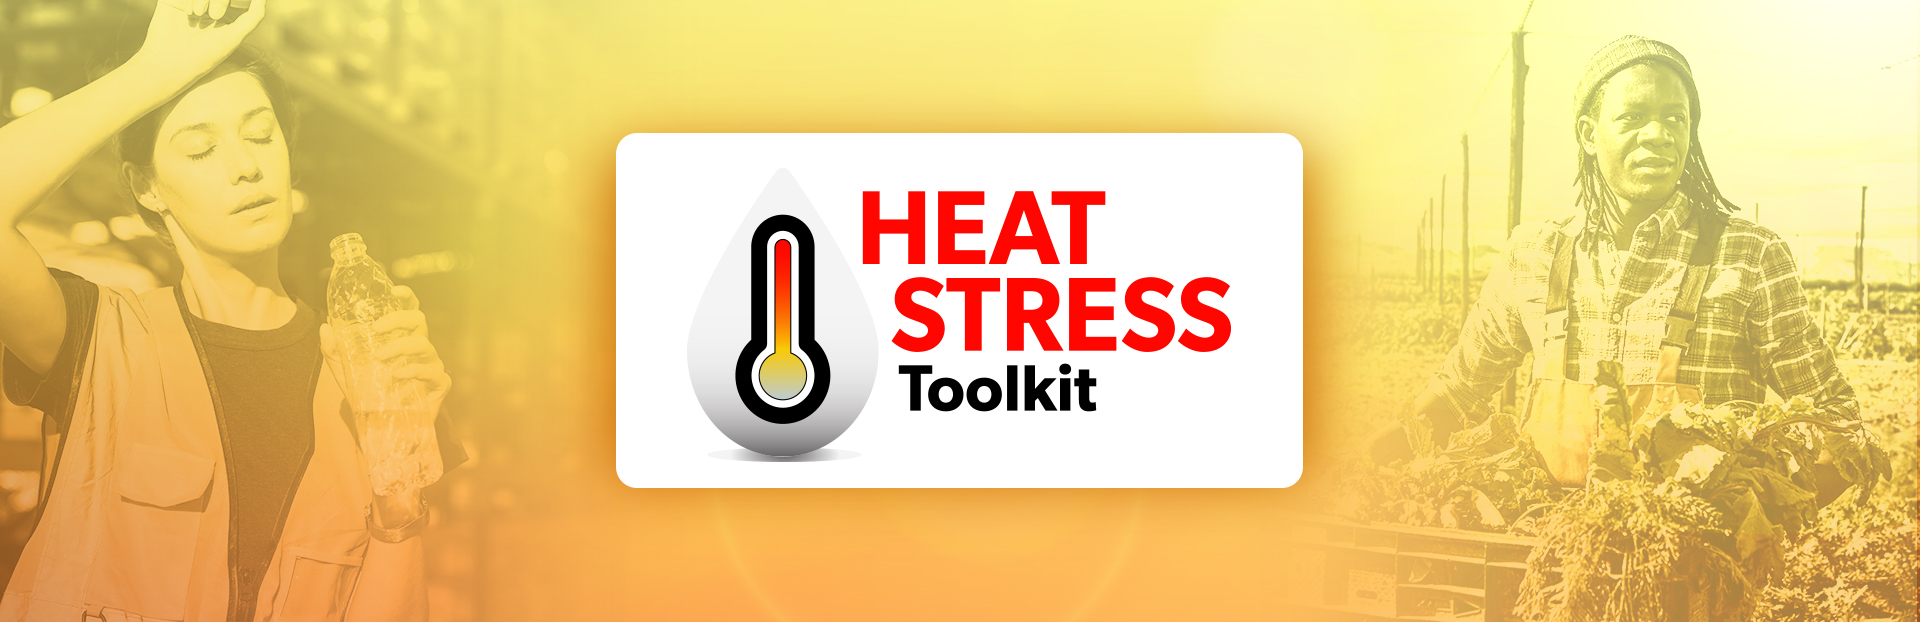 Heat Stress Toolkit | New toolkit to help prevent heat stress at work